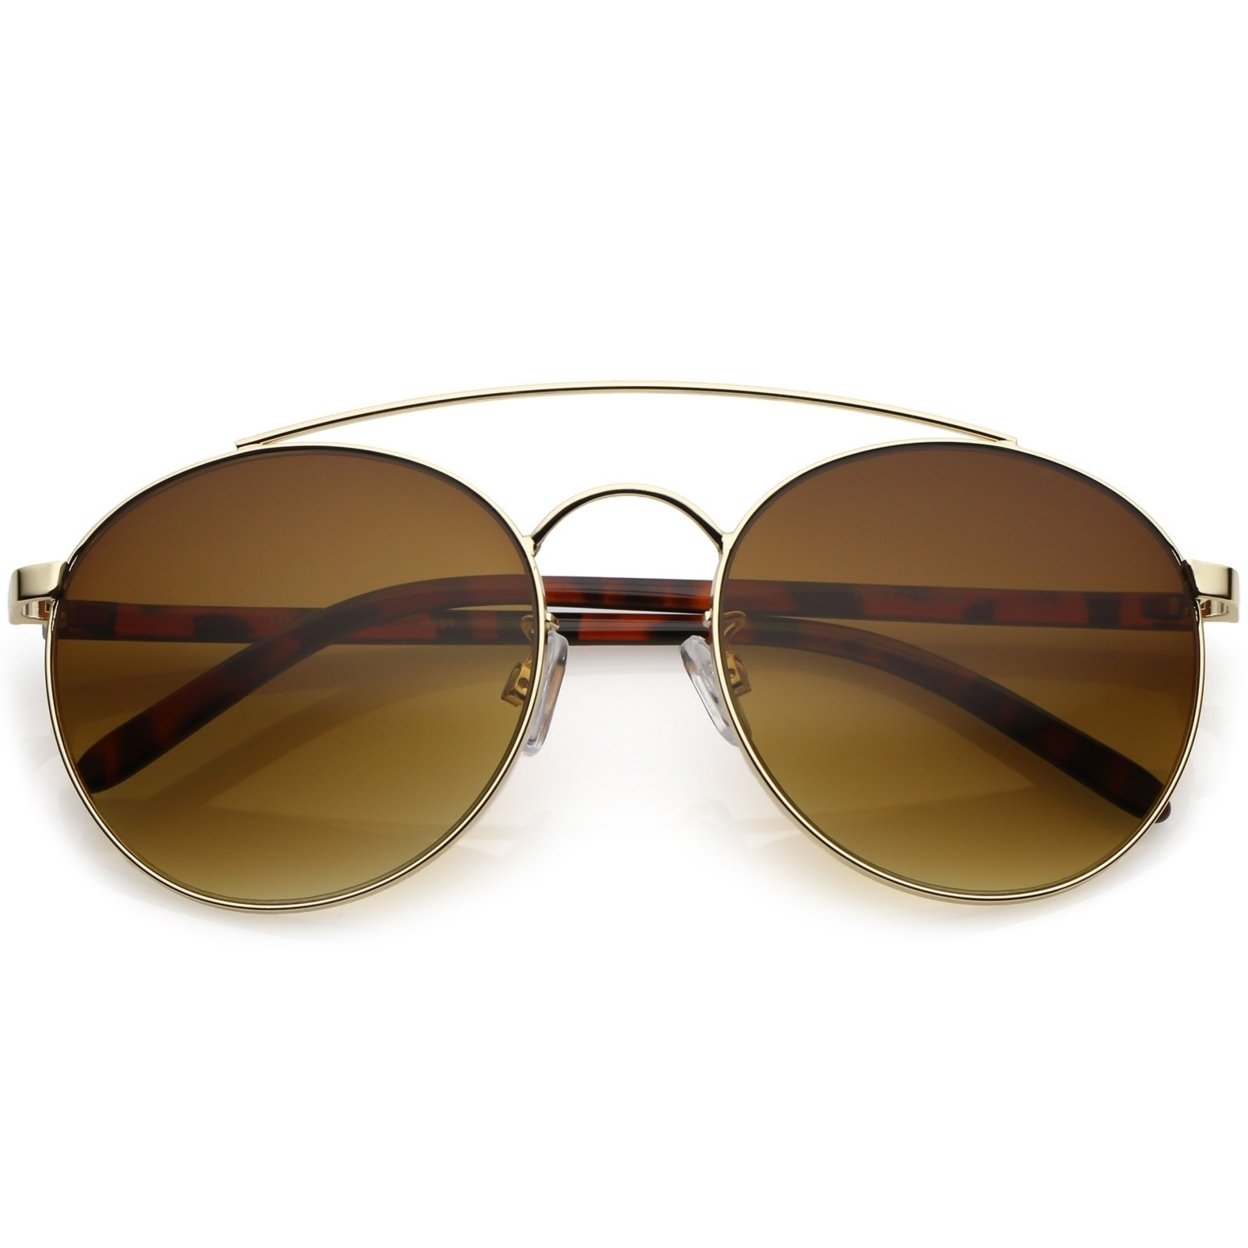 Modern Round Aviator Sunglasses Thick Arms Curved Double Crossbar 56mm - Gold / Amber